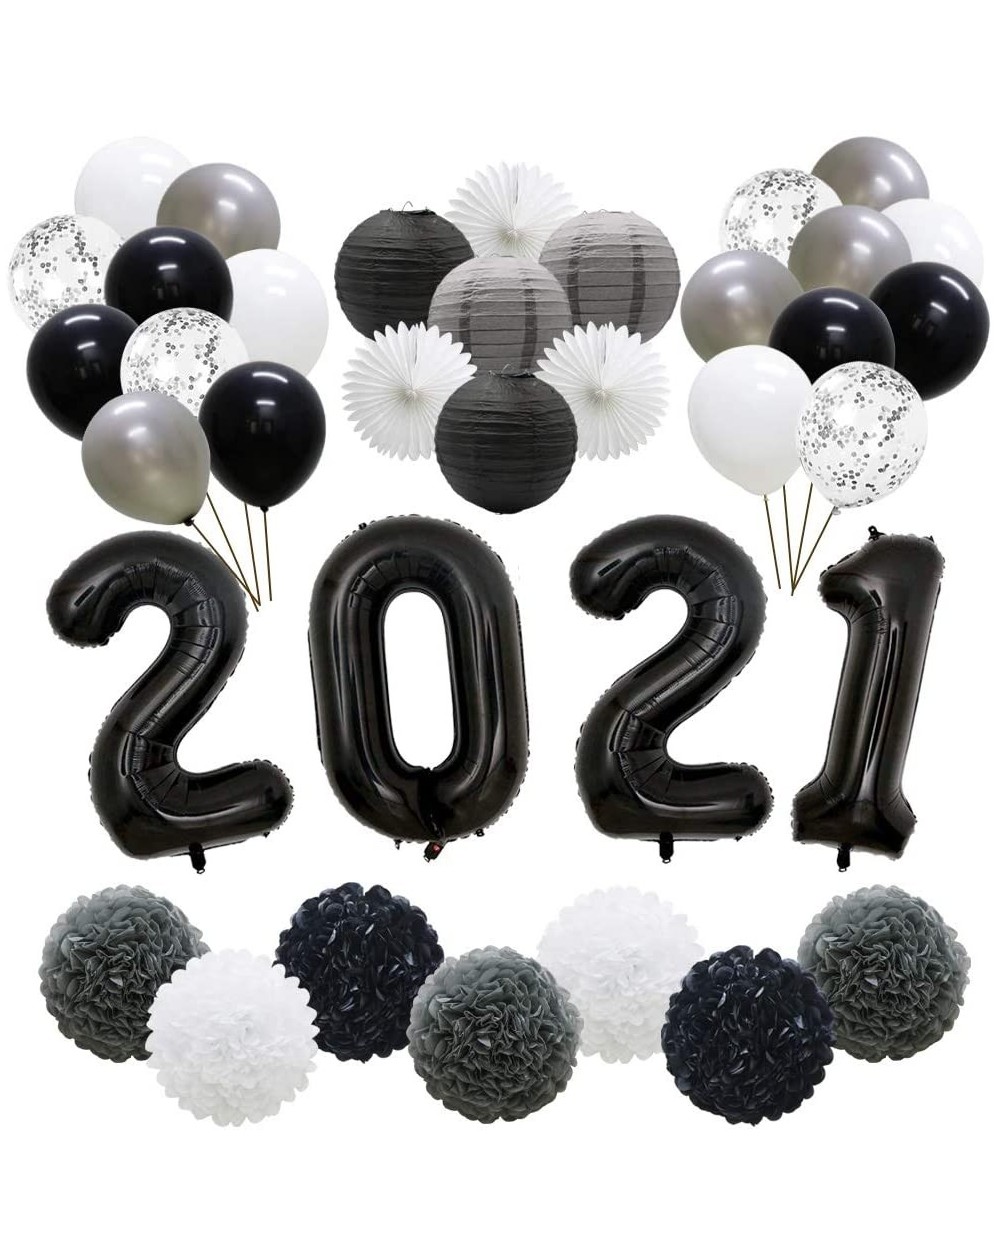 Balloons Black 2021 Graduation Balloons Decorations- New Year's Eve Party Supplies- Latex Balloons- Hanging Tissue Paper Fans...